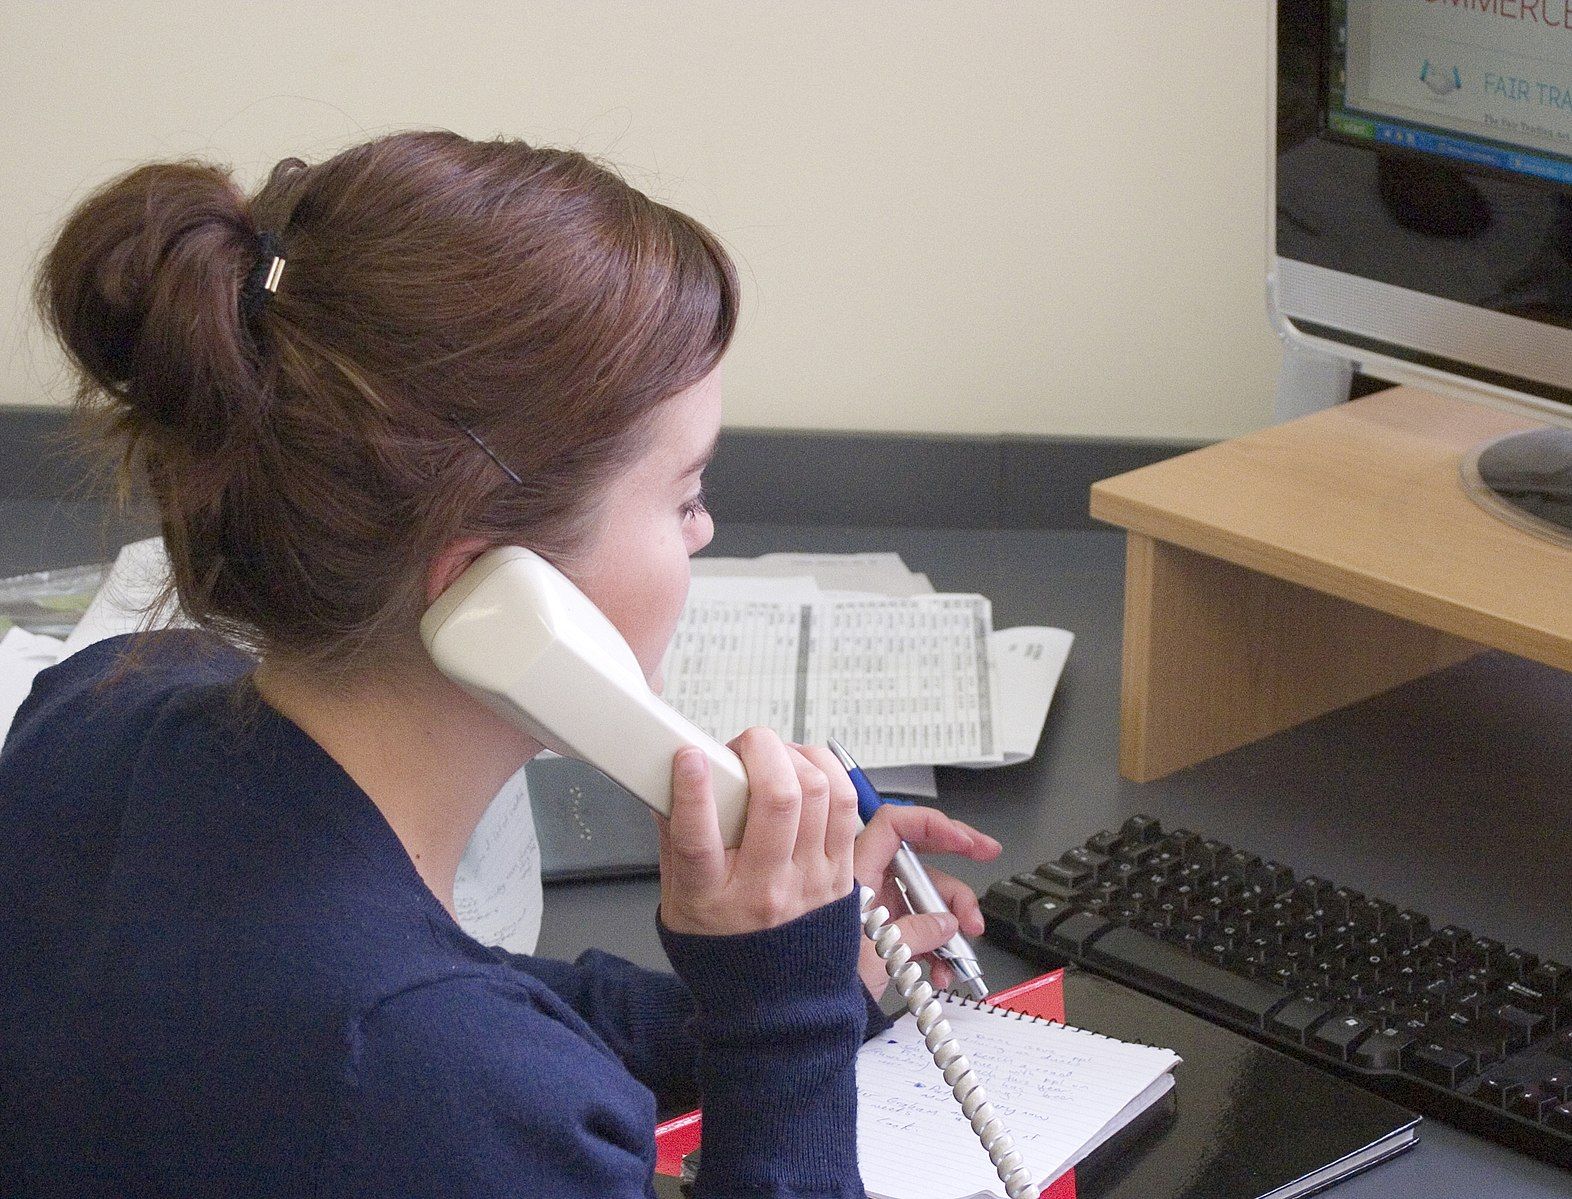 Using a VoIP phone system